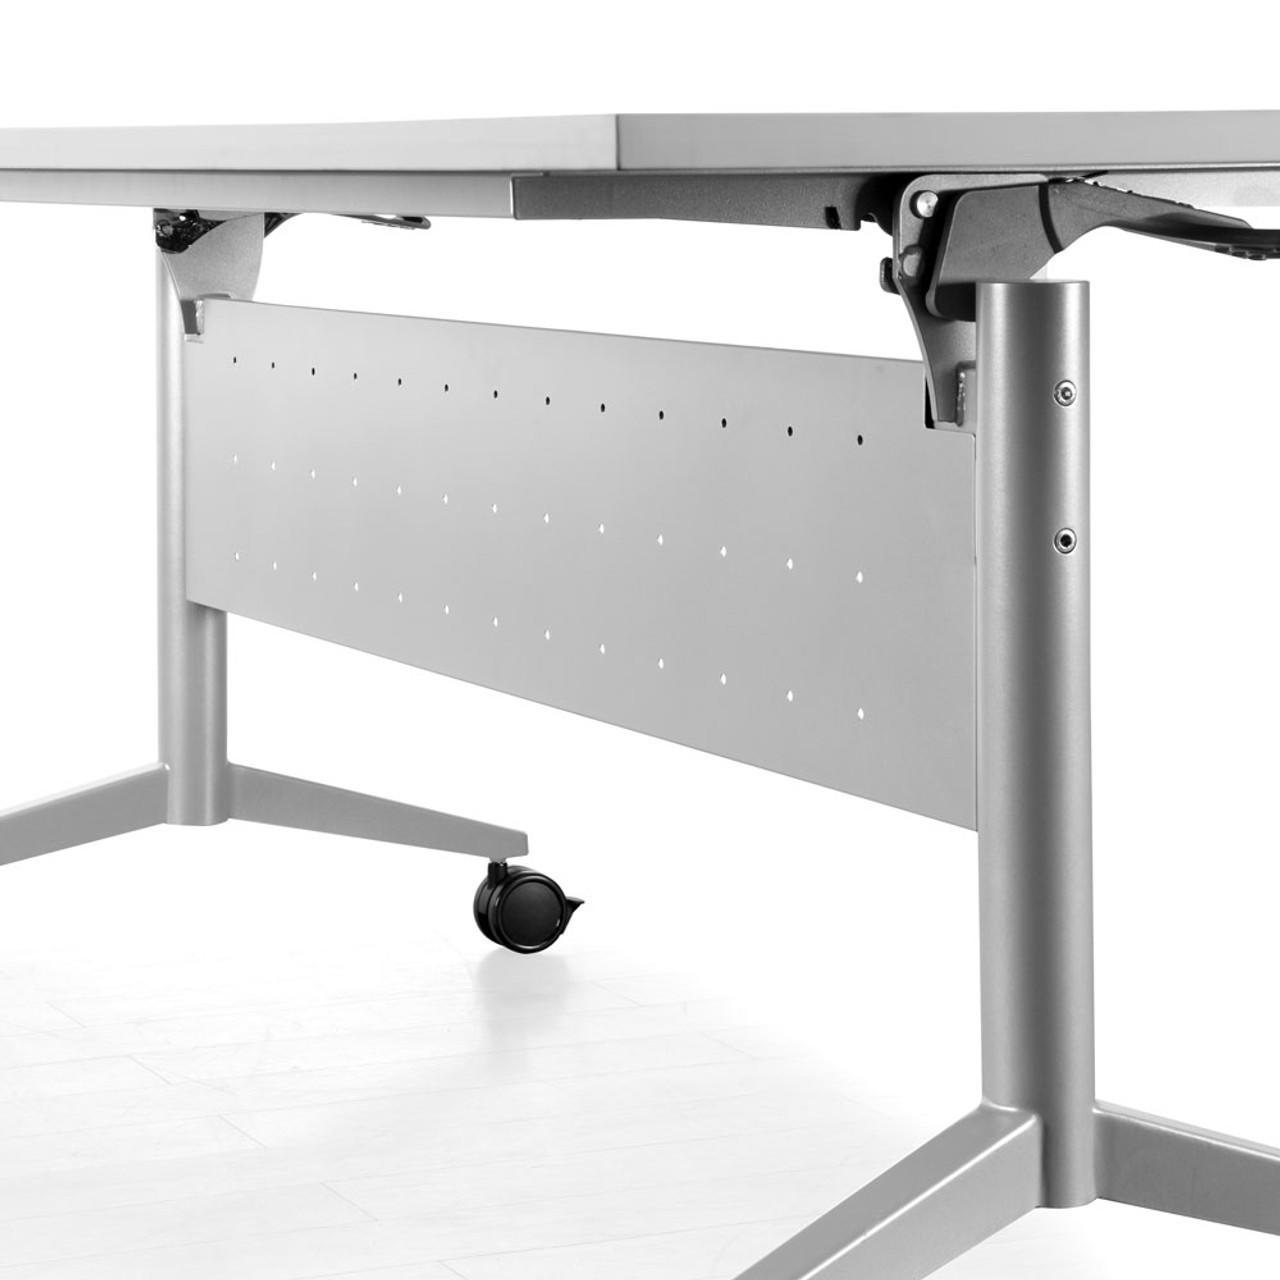  Office Source 60x24 Flip Top Training Room Table 